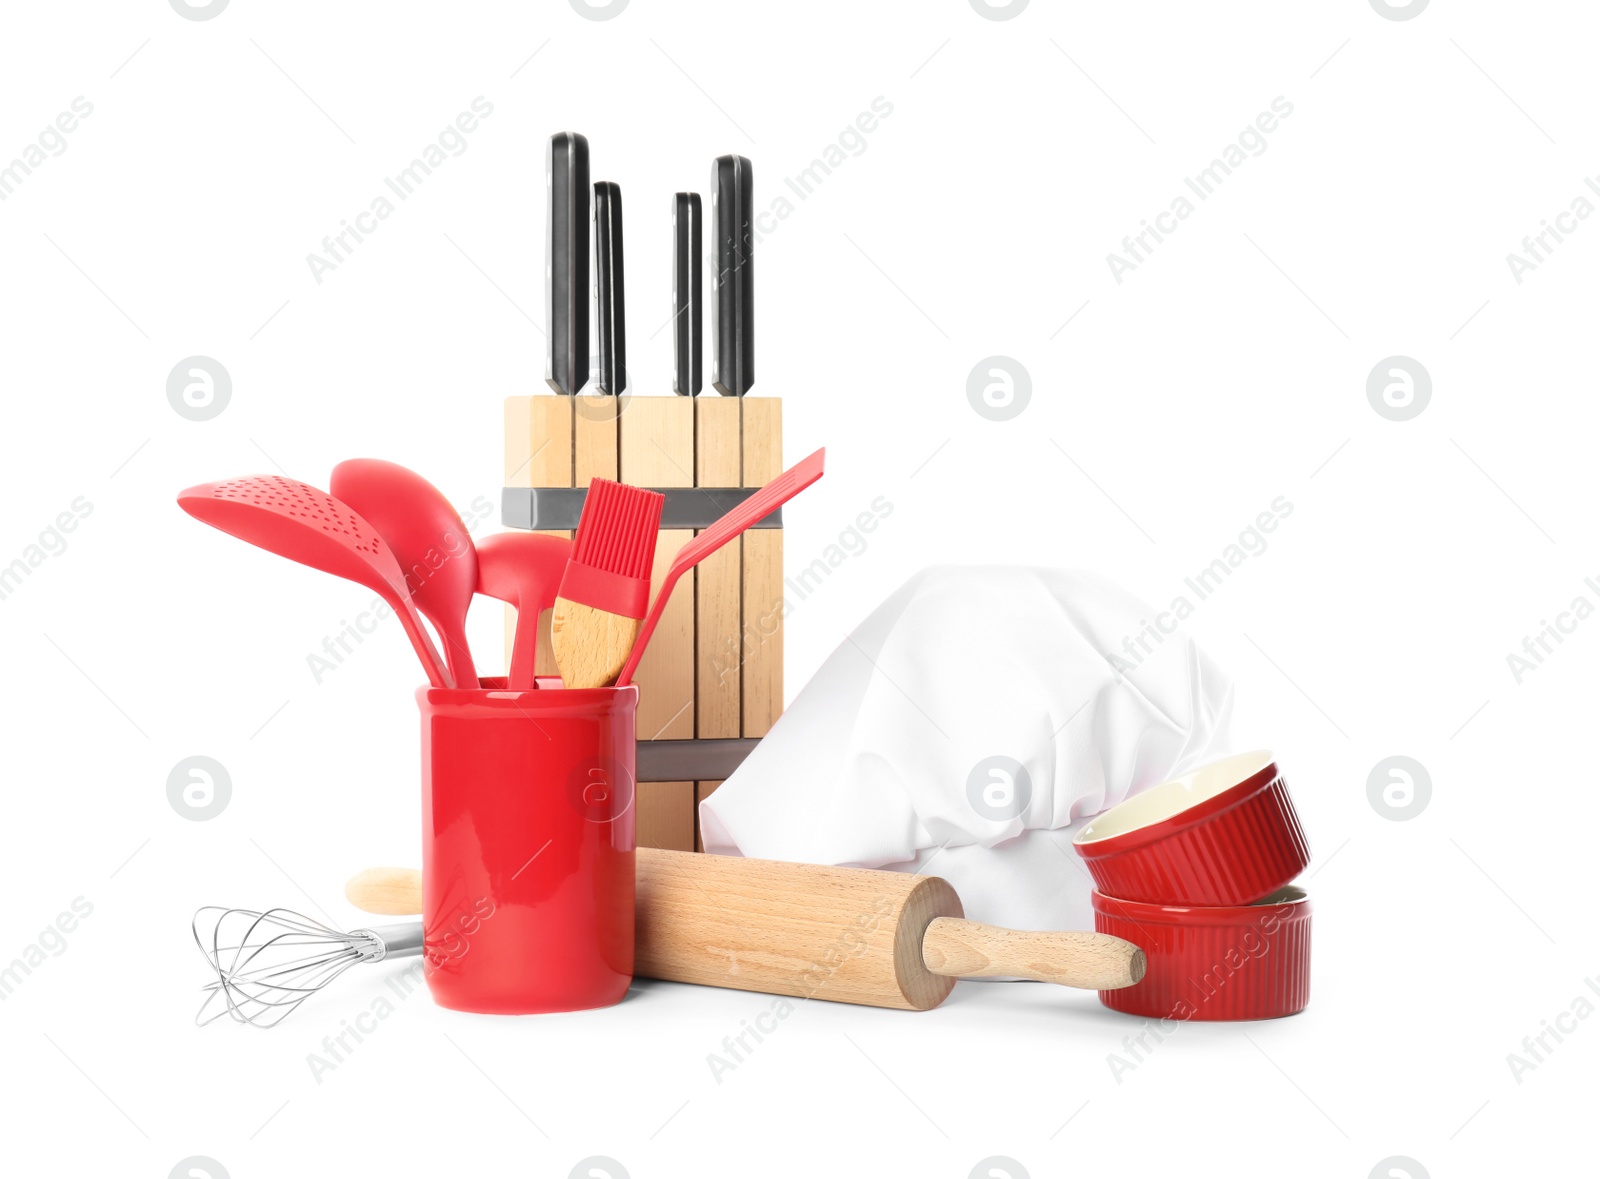 Photo of Set of different cooking utensils and chef's hat on white background